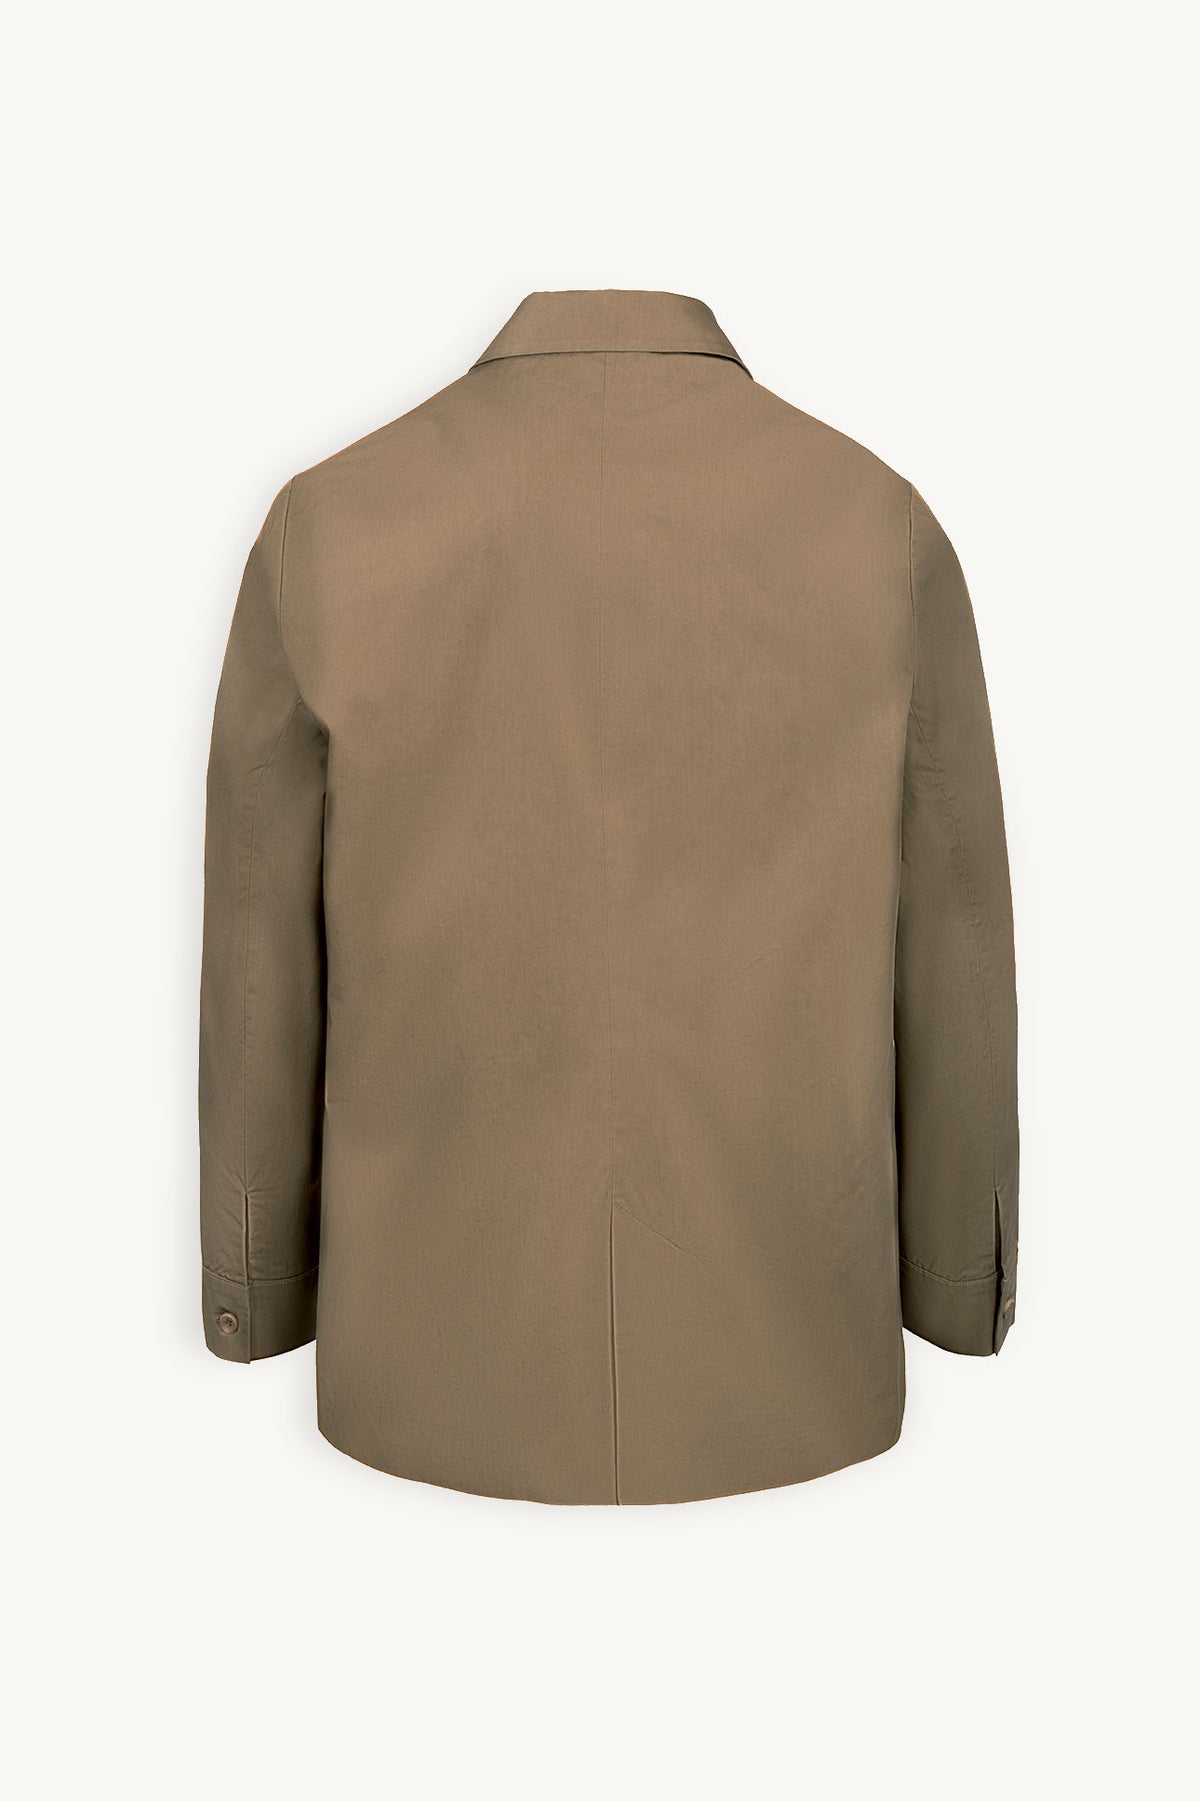 Andr1a Jacket aus Baumwolle in Tobacco